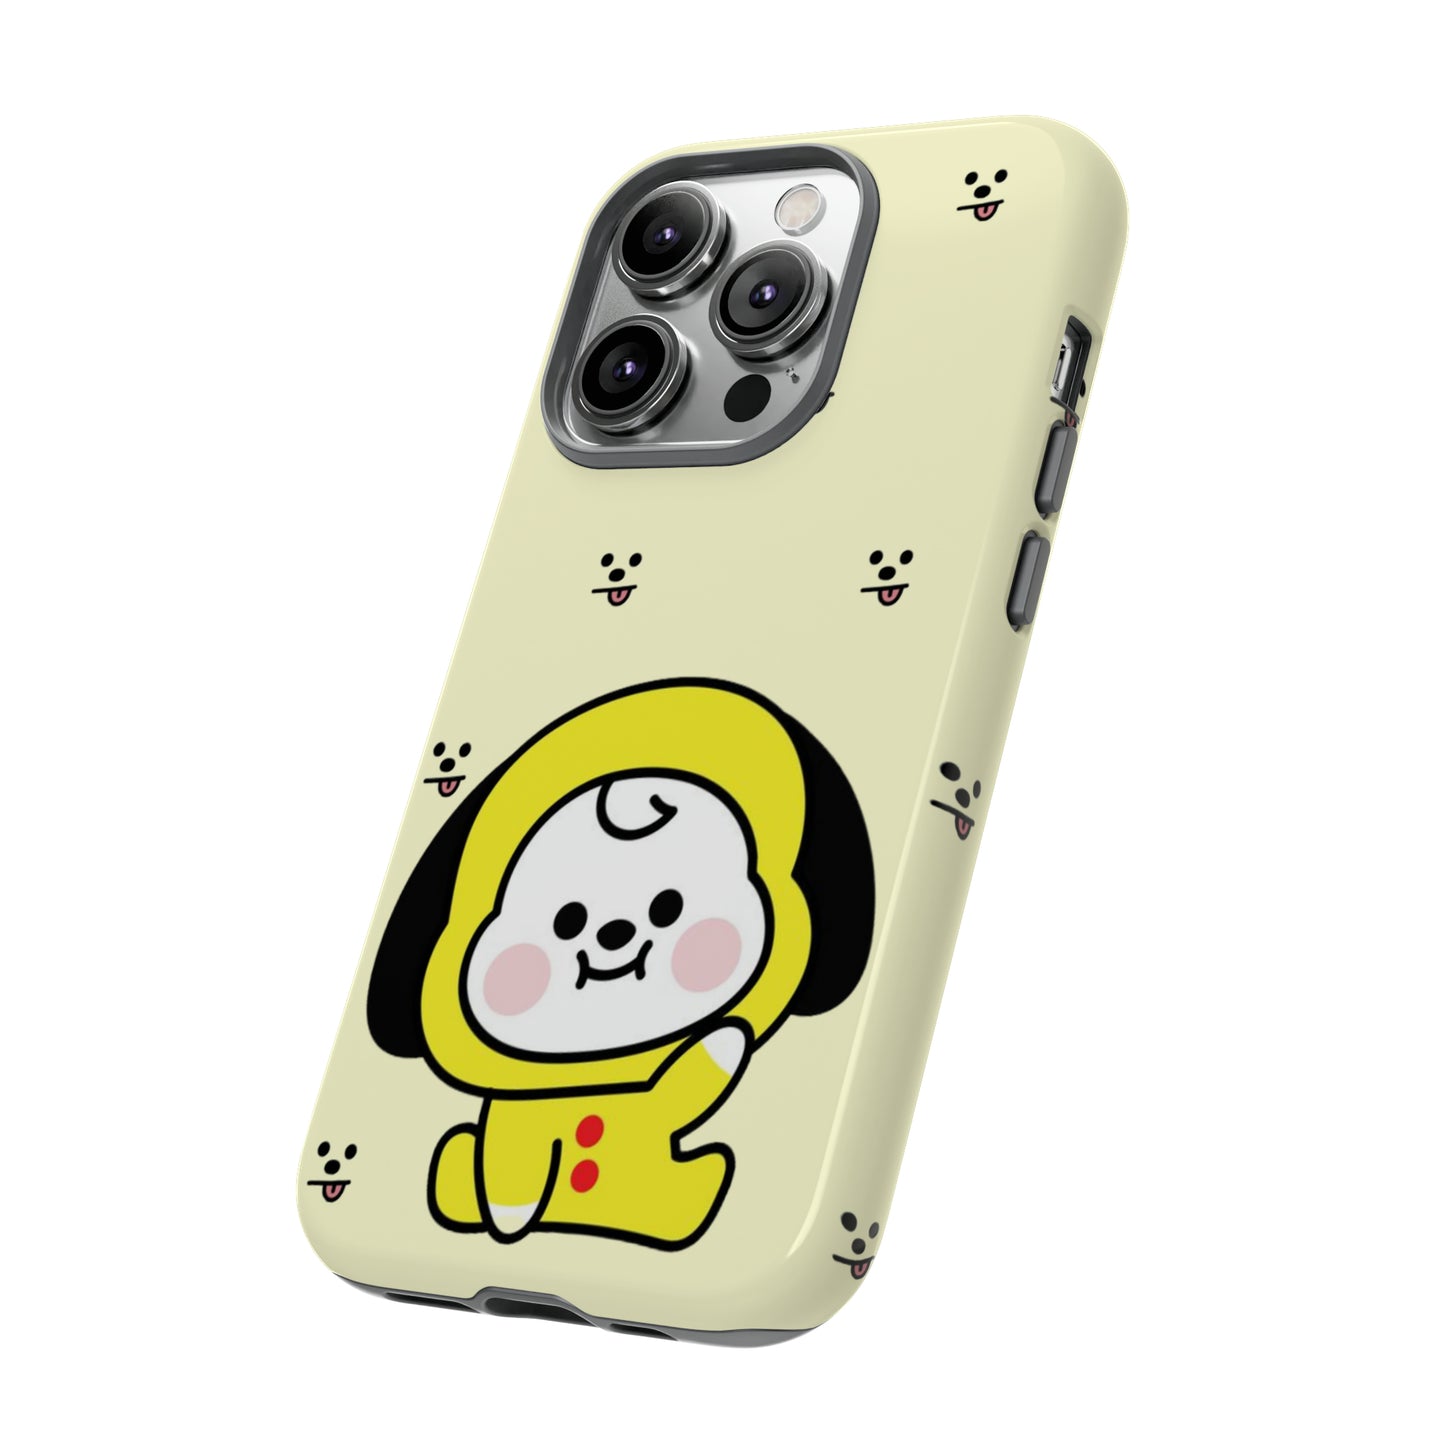 Chimmy Iphone Case